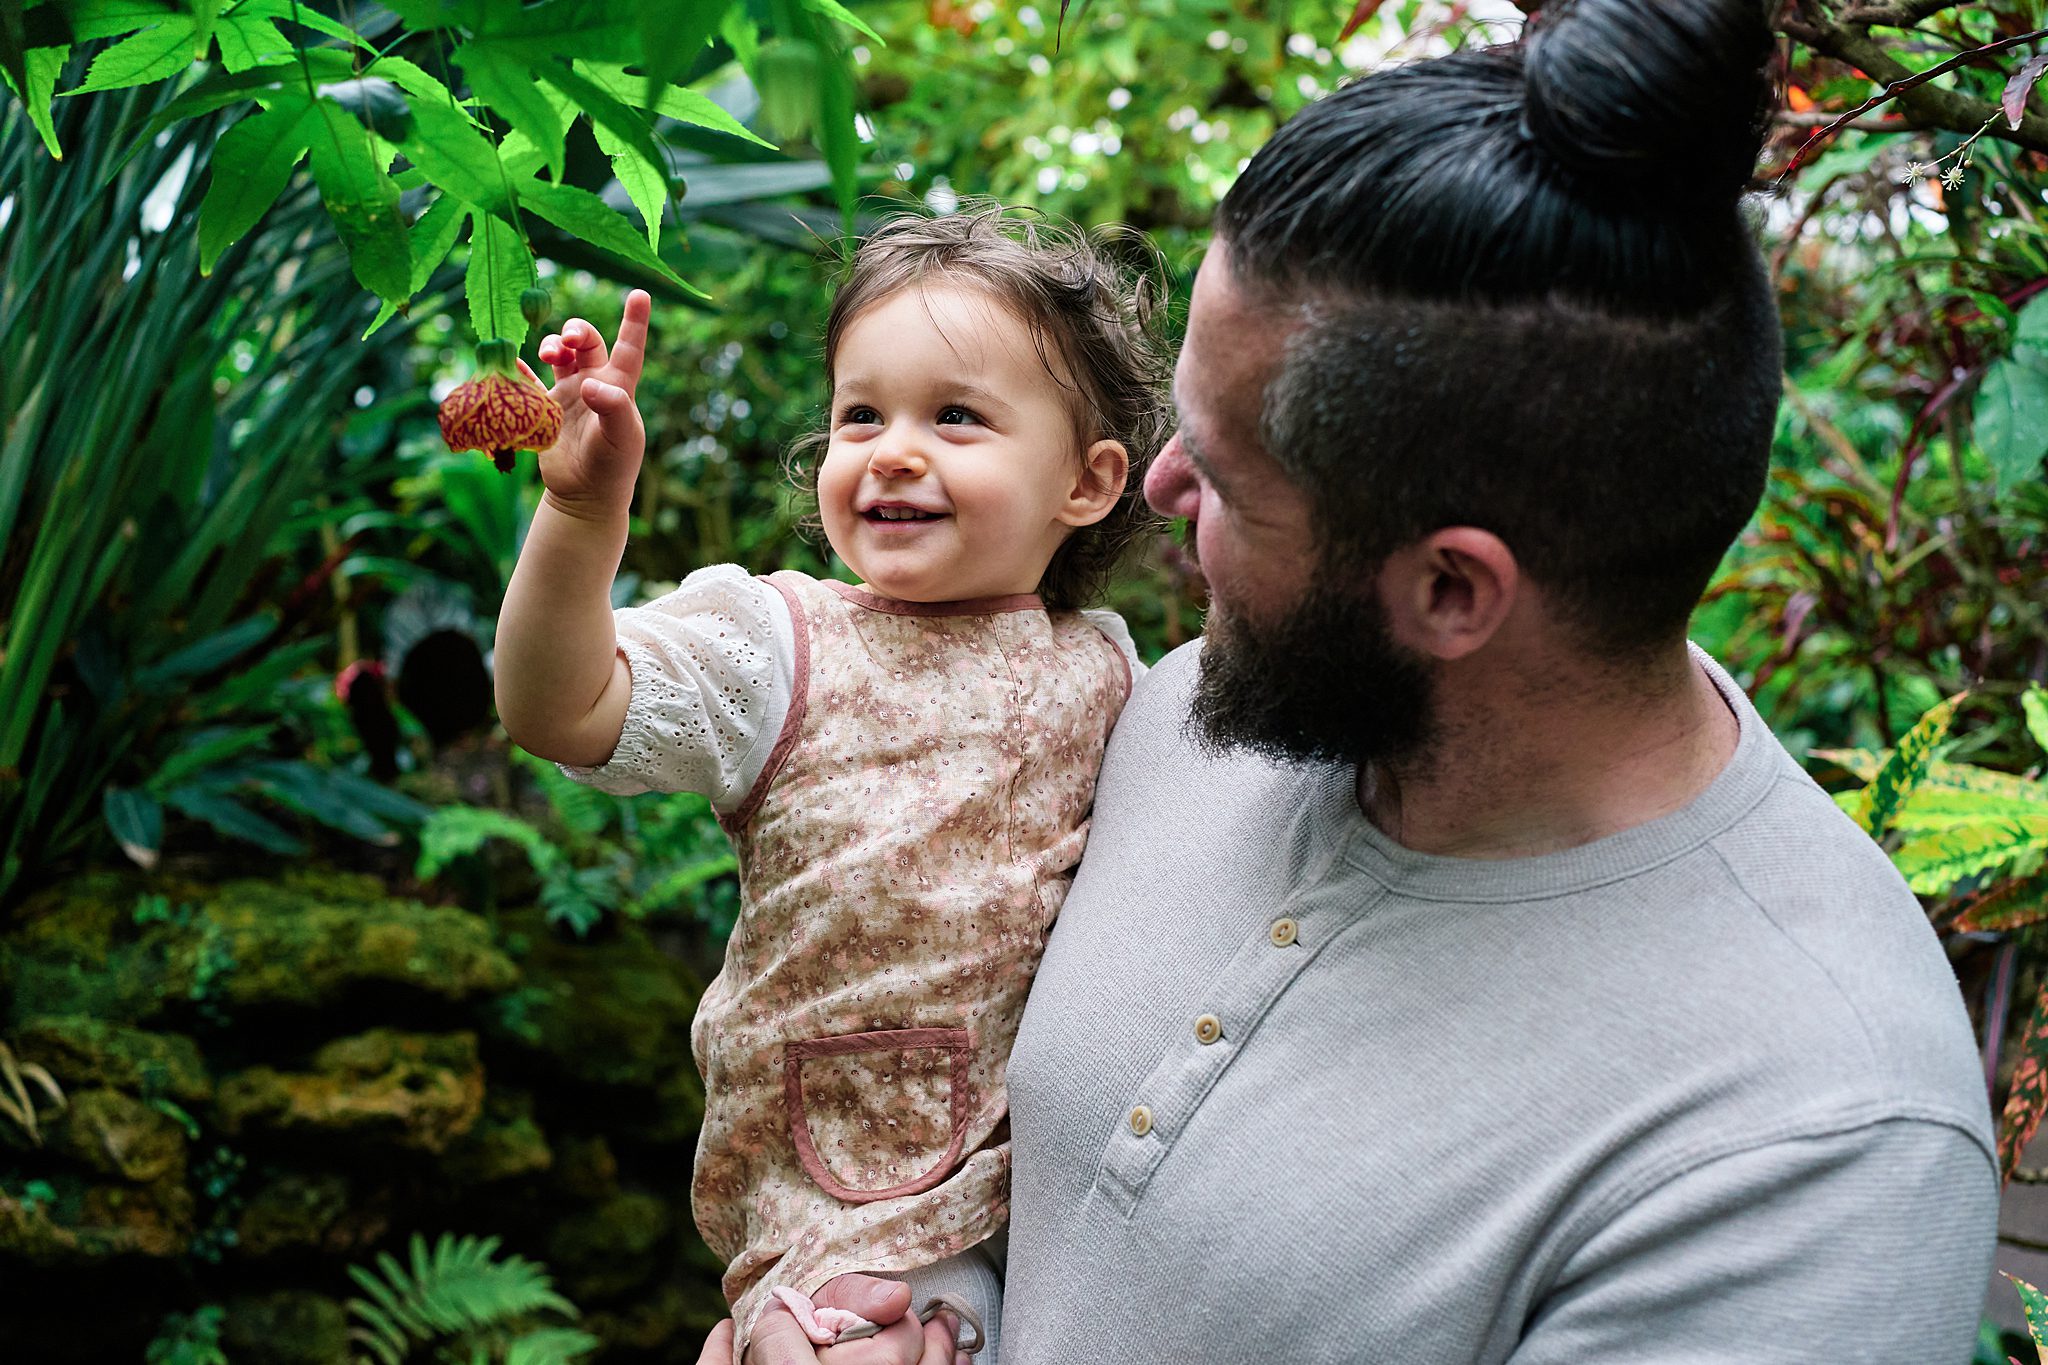 dad and daughter at Phipps conservatory in pittsburgh for family photo session 